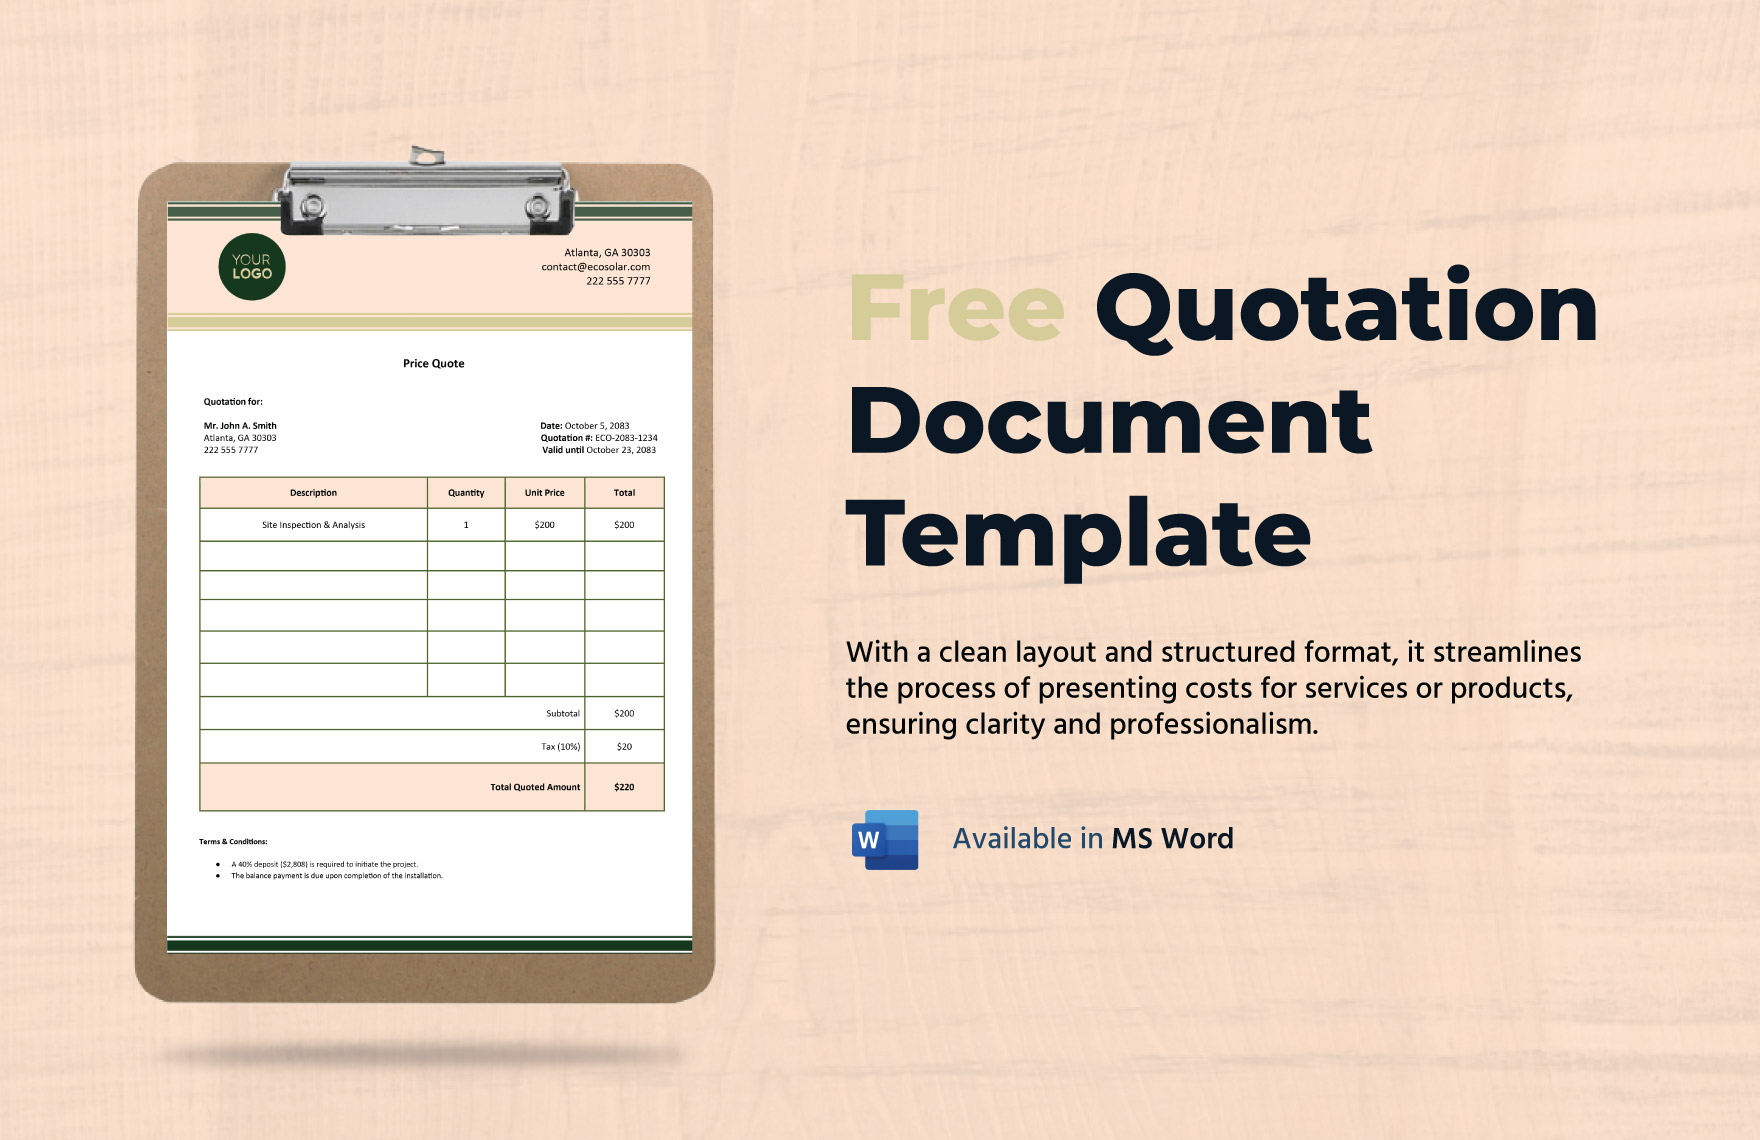 Free Quotation Document Template